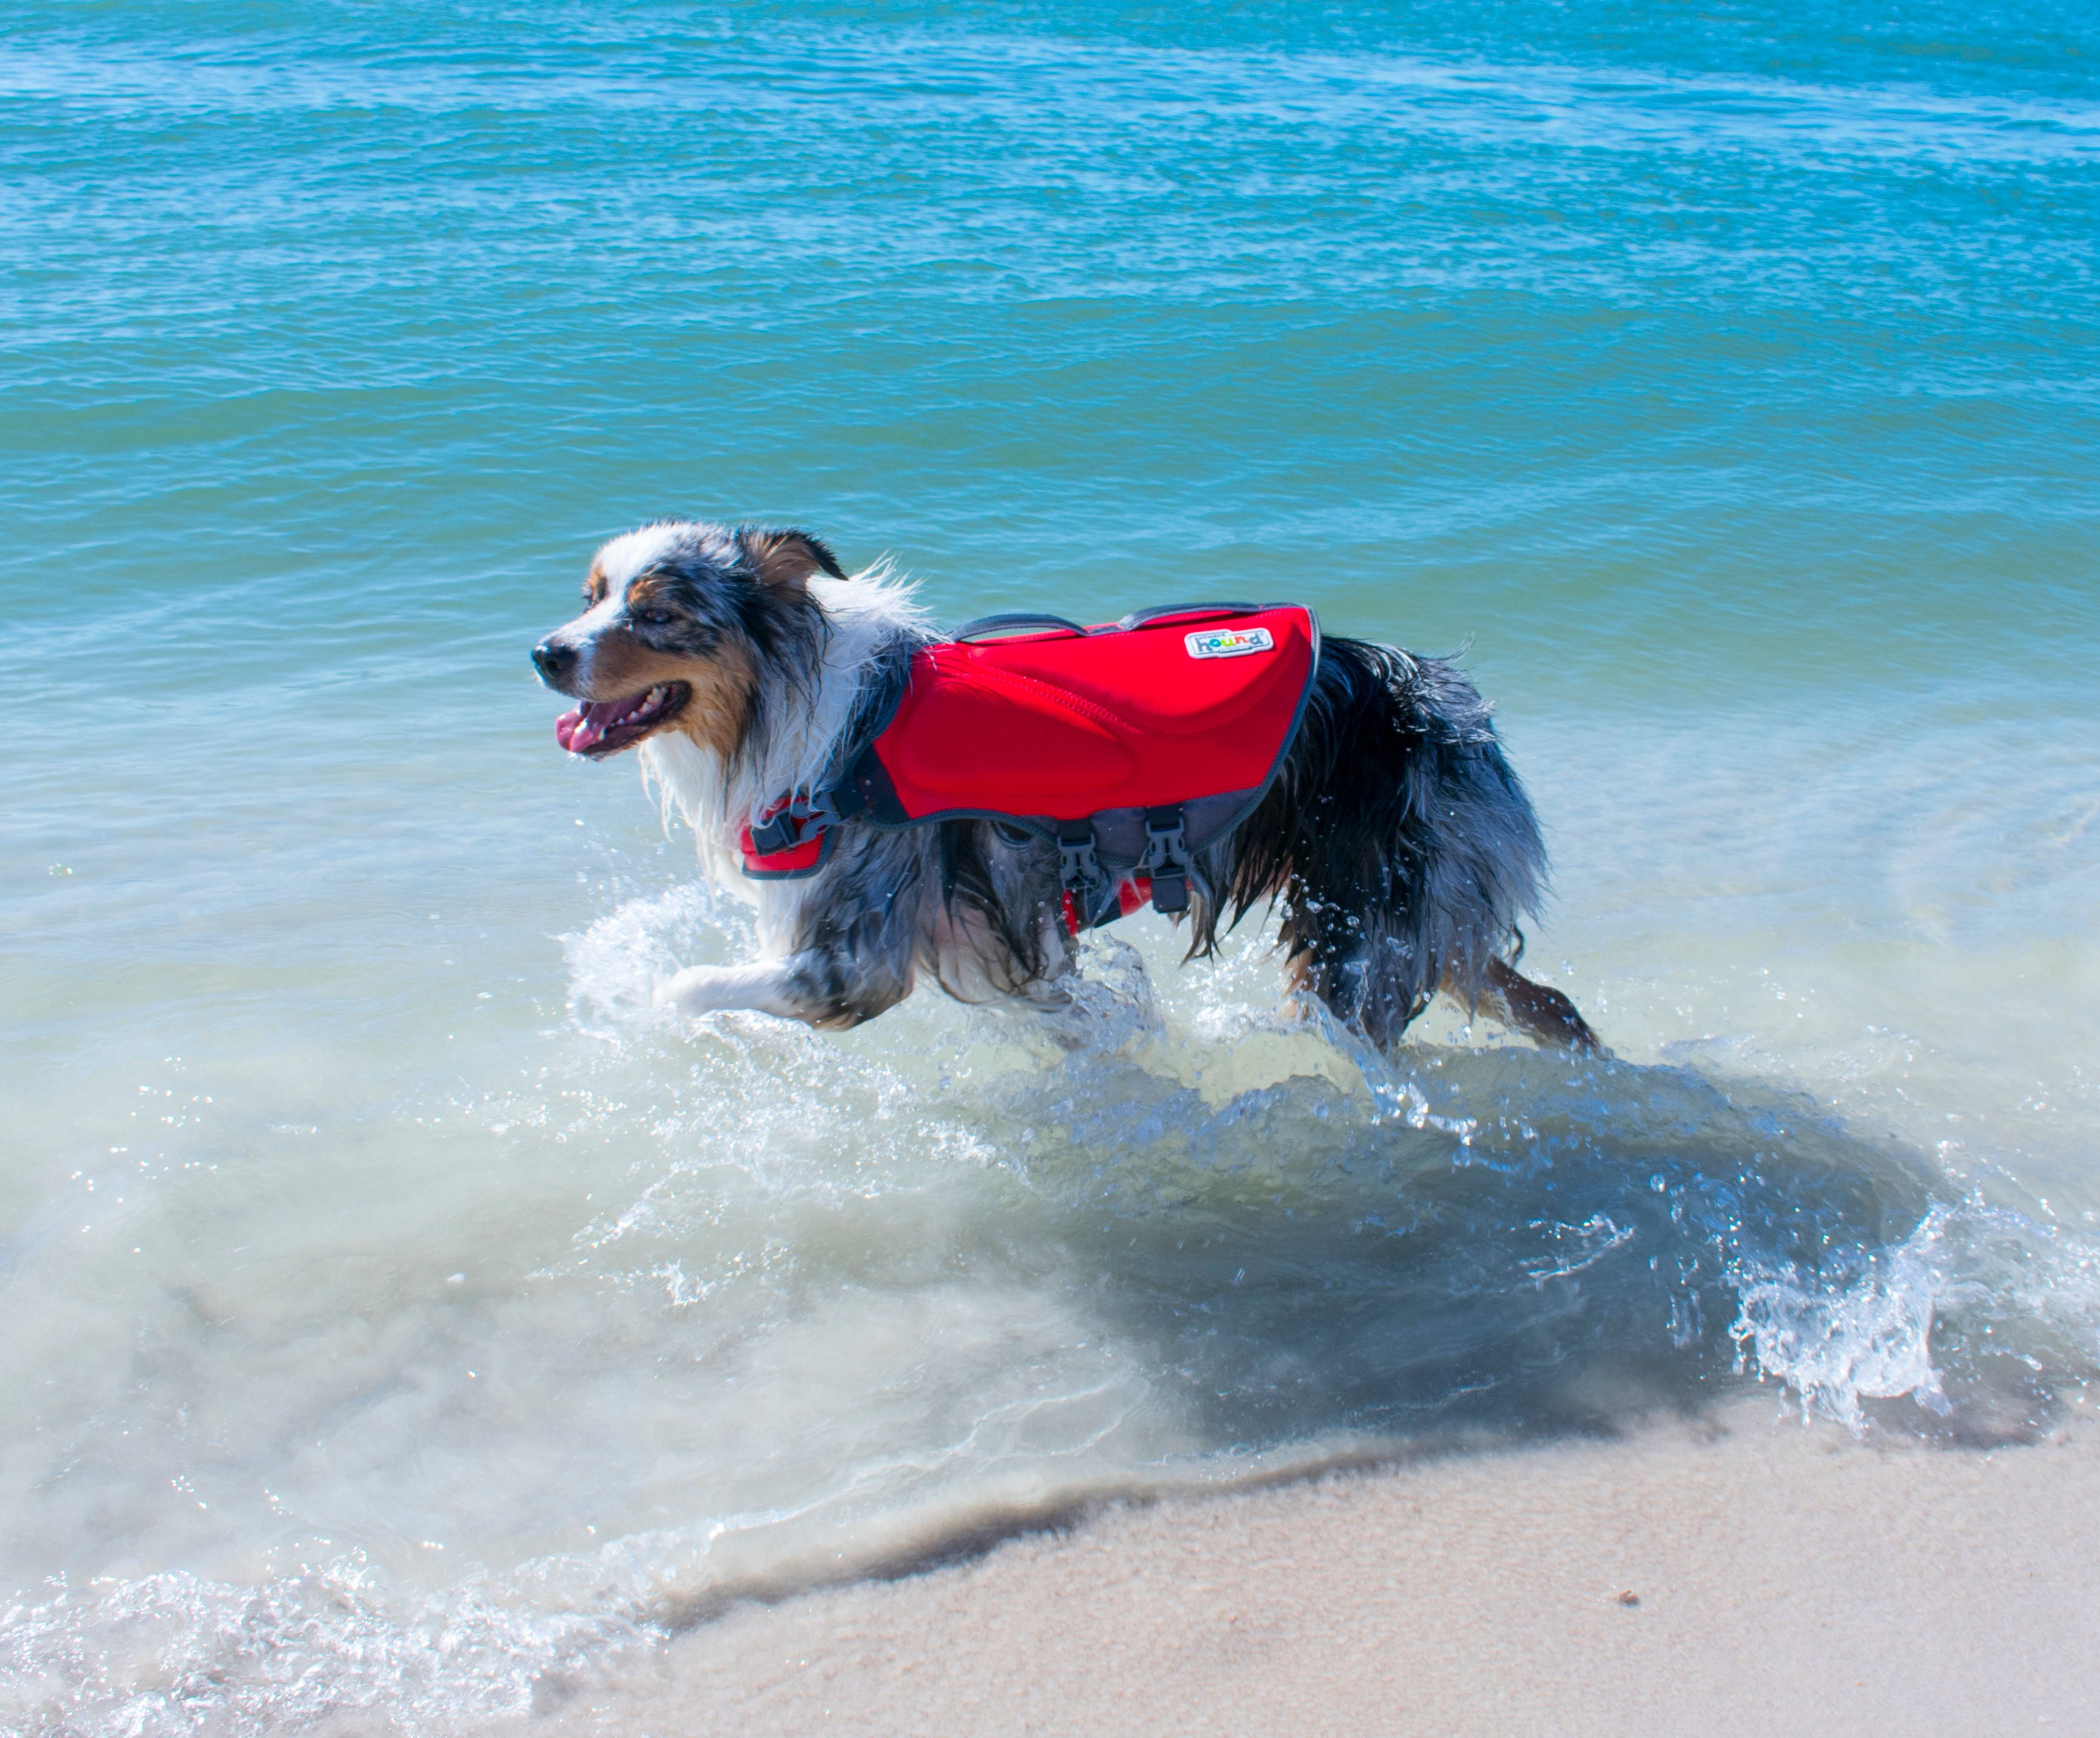 Pet Planet Canmore - Outward Hound's Granby Splash Dog Life Jacket is a  high-performance dog flotation device for boating, water sport adventures  and activities with dogs. Designed to keep your dog safe